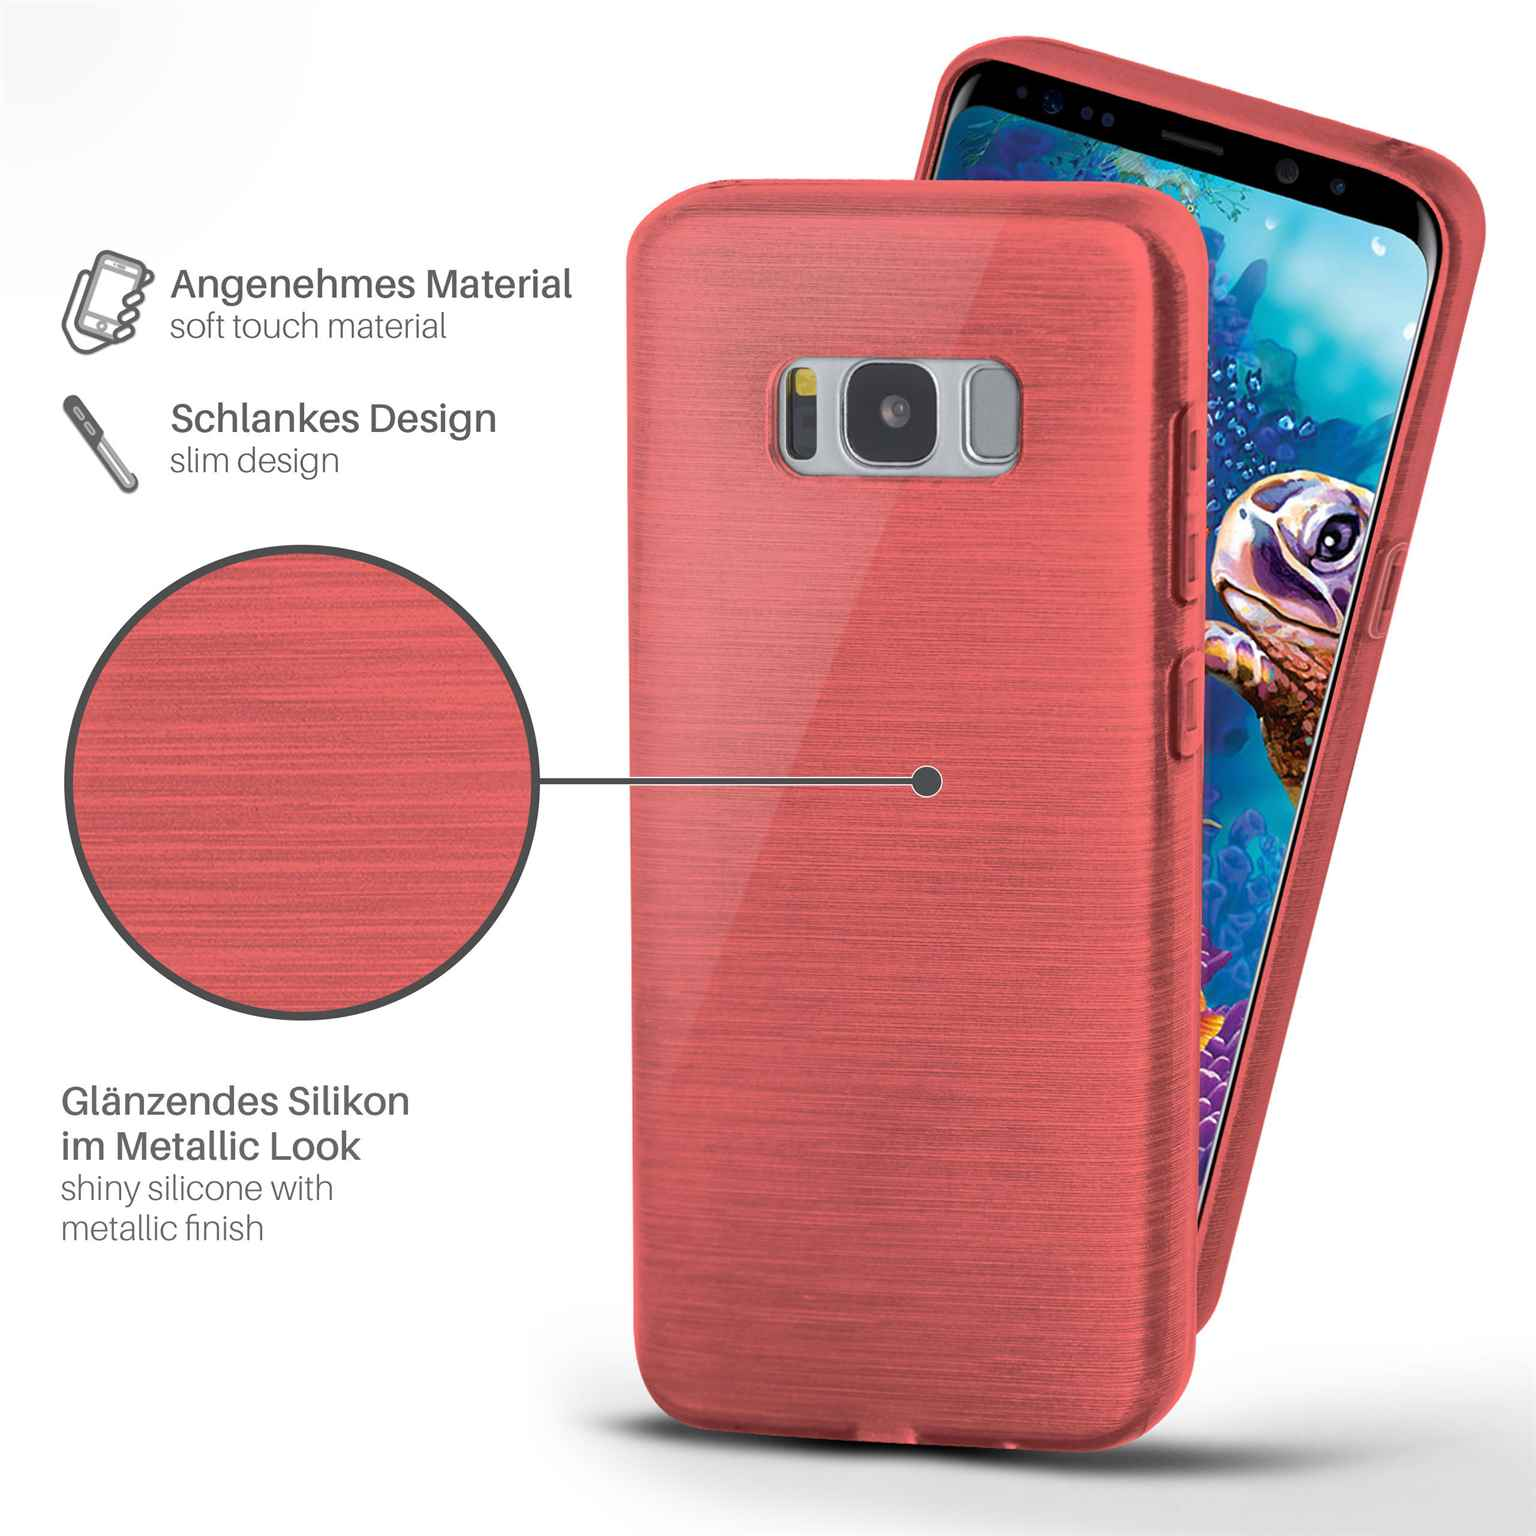 Backcover, S8, Brushed Galaxy MOEX Coral-Red Samsung, Case,